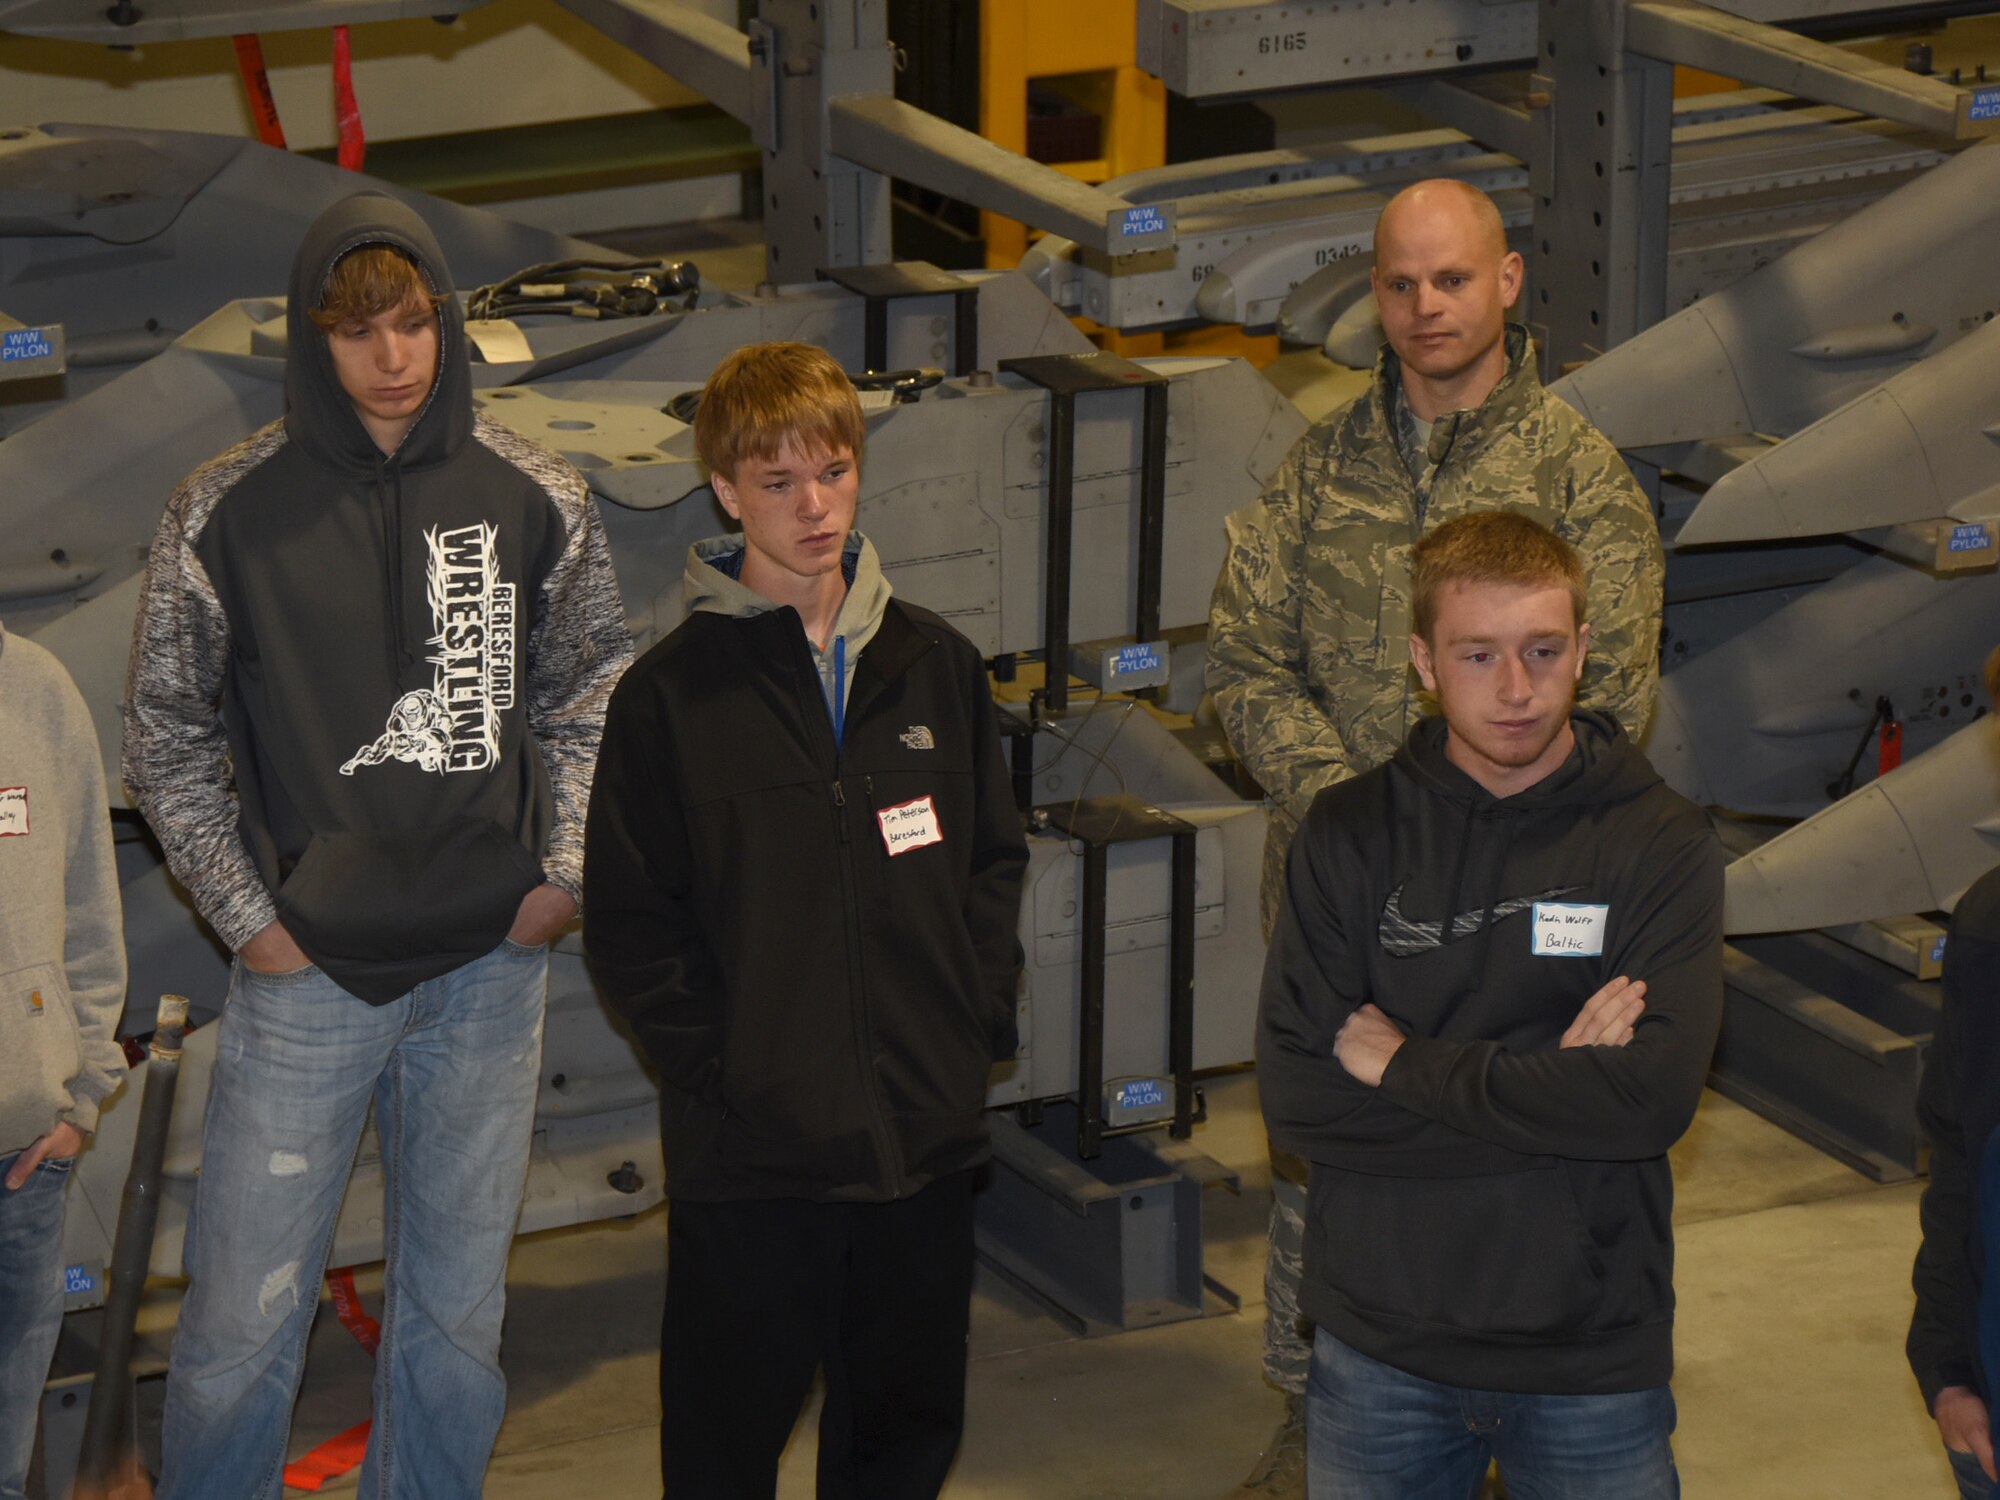 SIOUX FALLS, S.D. - Beresford, S.D. High School juniors, Lathen Norling and Tim Peterson, listen with other high school students as a weapons technician explains his career in the South Dakota Air National Guard during Career Day at Joe Foss Field, S.D. April 6, 2016.  Also pictured is Tim Peterson's father, Master Sgt. Gregory Peterson, 114th Security Forces Squadron flight sergeant, who was present on the tour with Tim. (U.S. Air National Guard photo by Senior Master Sgt. Nancy Ausland/Released)